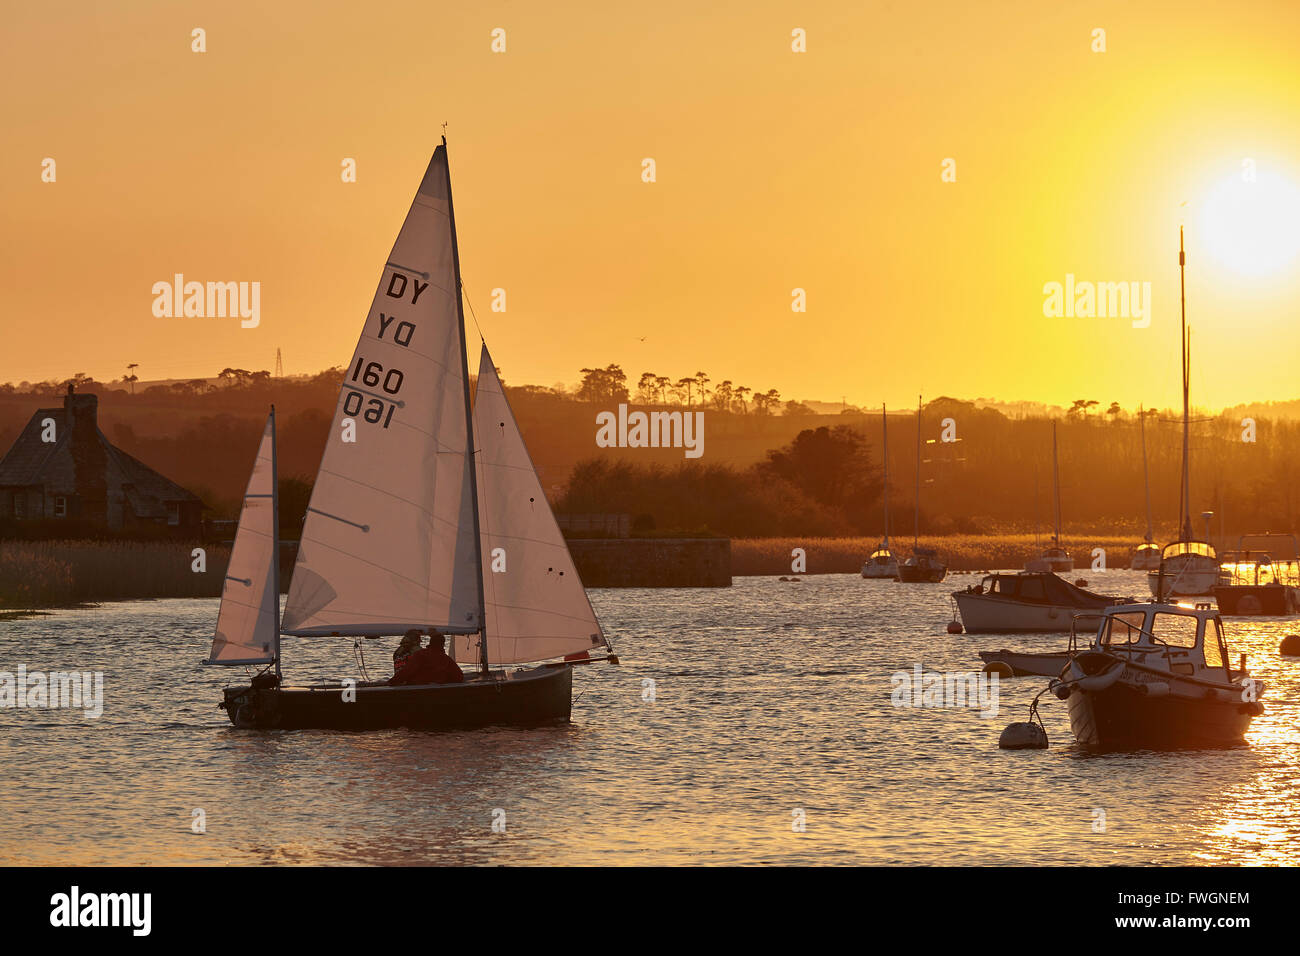 A sunset view of sailing on the River Exe at Topsham, near Exeter, Devon, England, United Kingdom, Europe Stock Photo